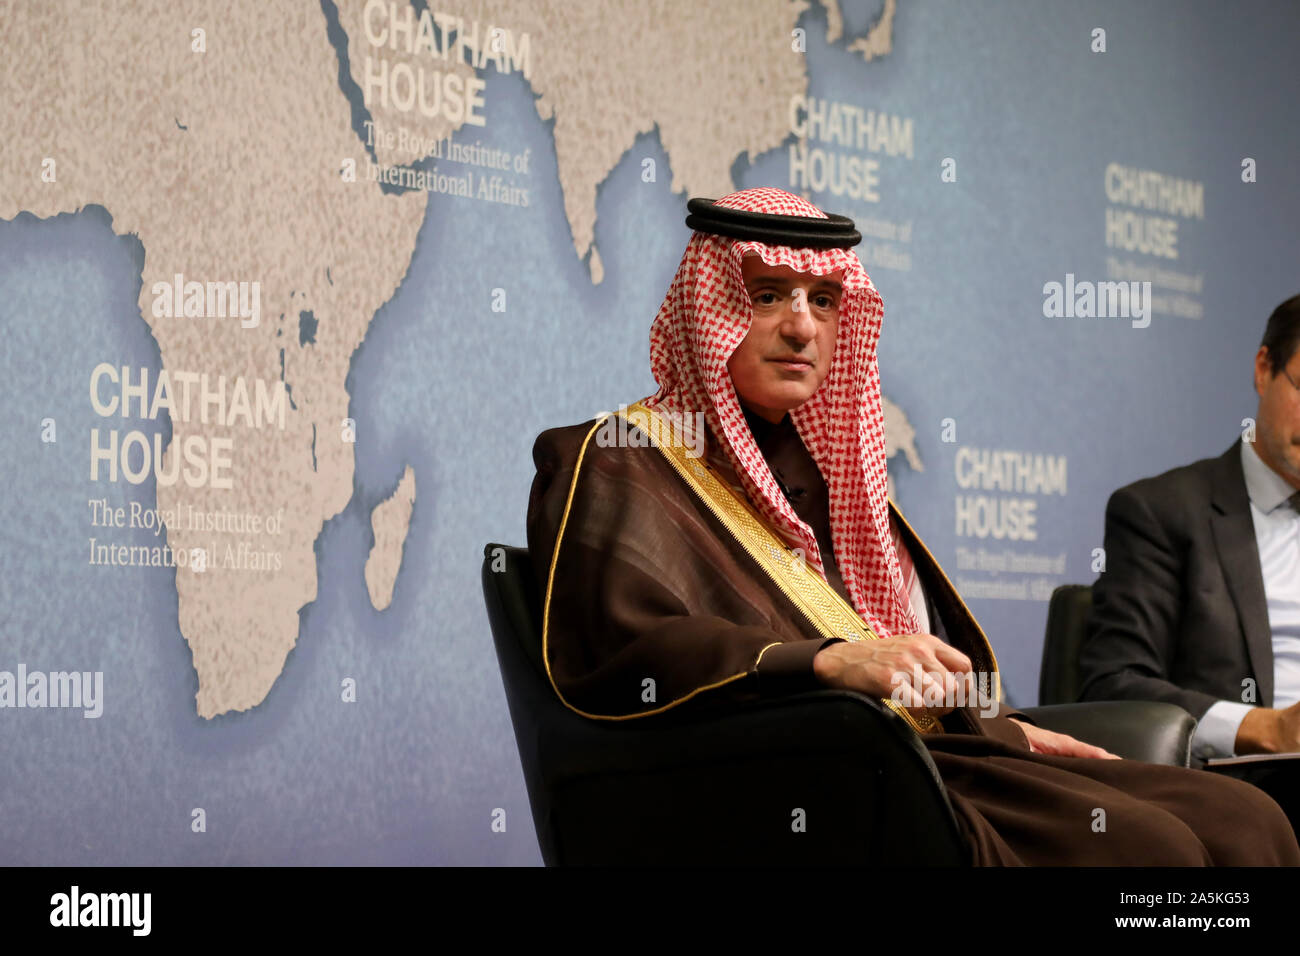 London / UK – October 14, 2019: Adel al-Jubeir, Saudi Arabia’s minister of state for foreign affairs, speaking at Chatham House on Saudi foreign policy Stock Photo